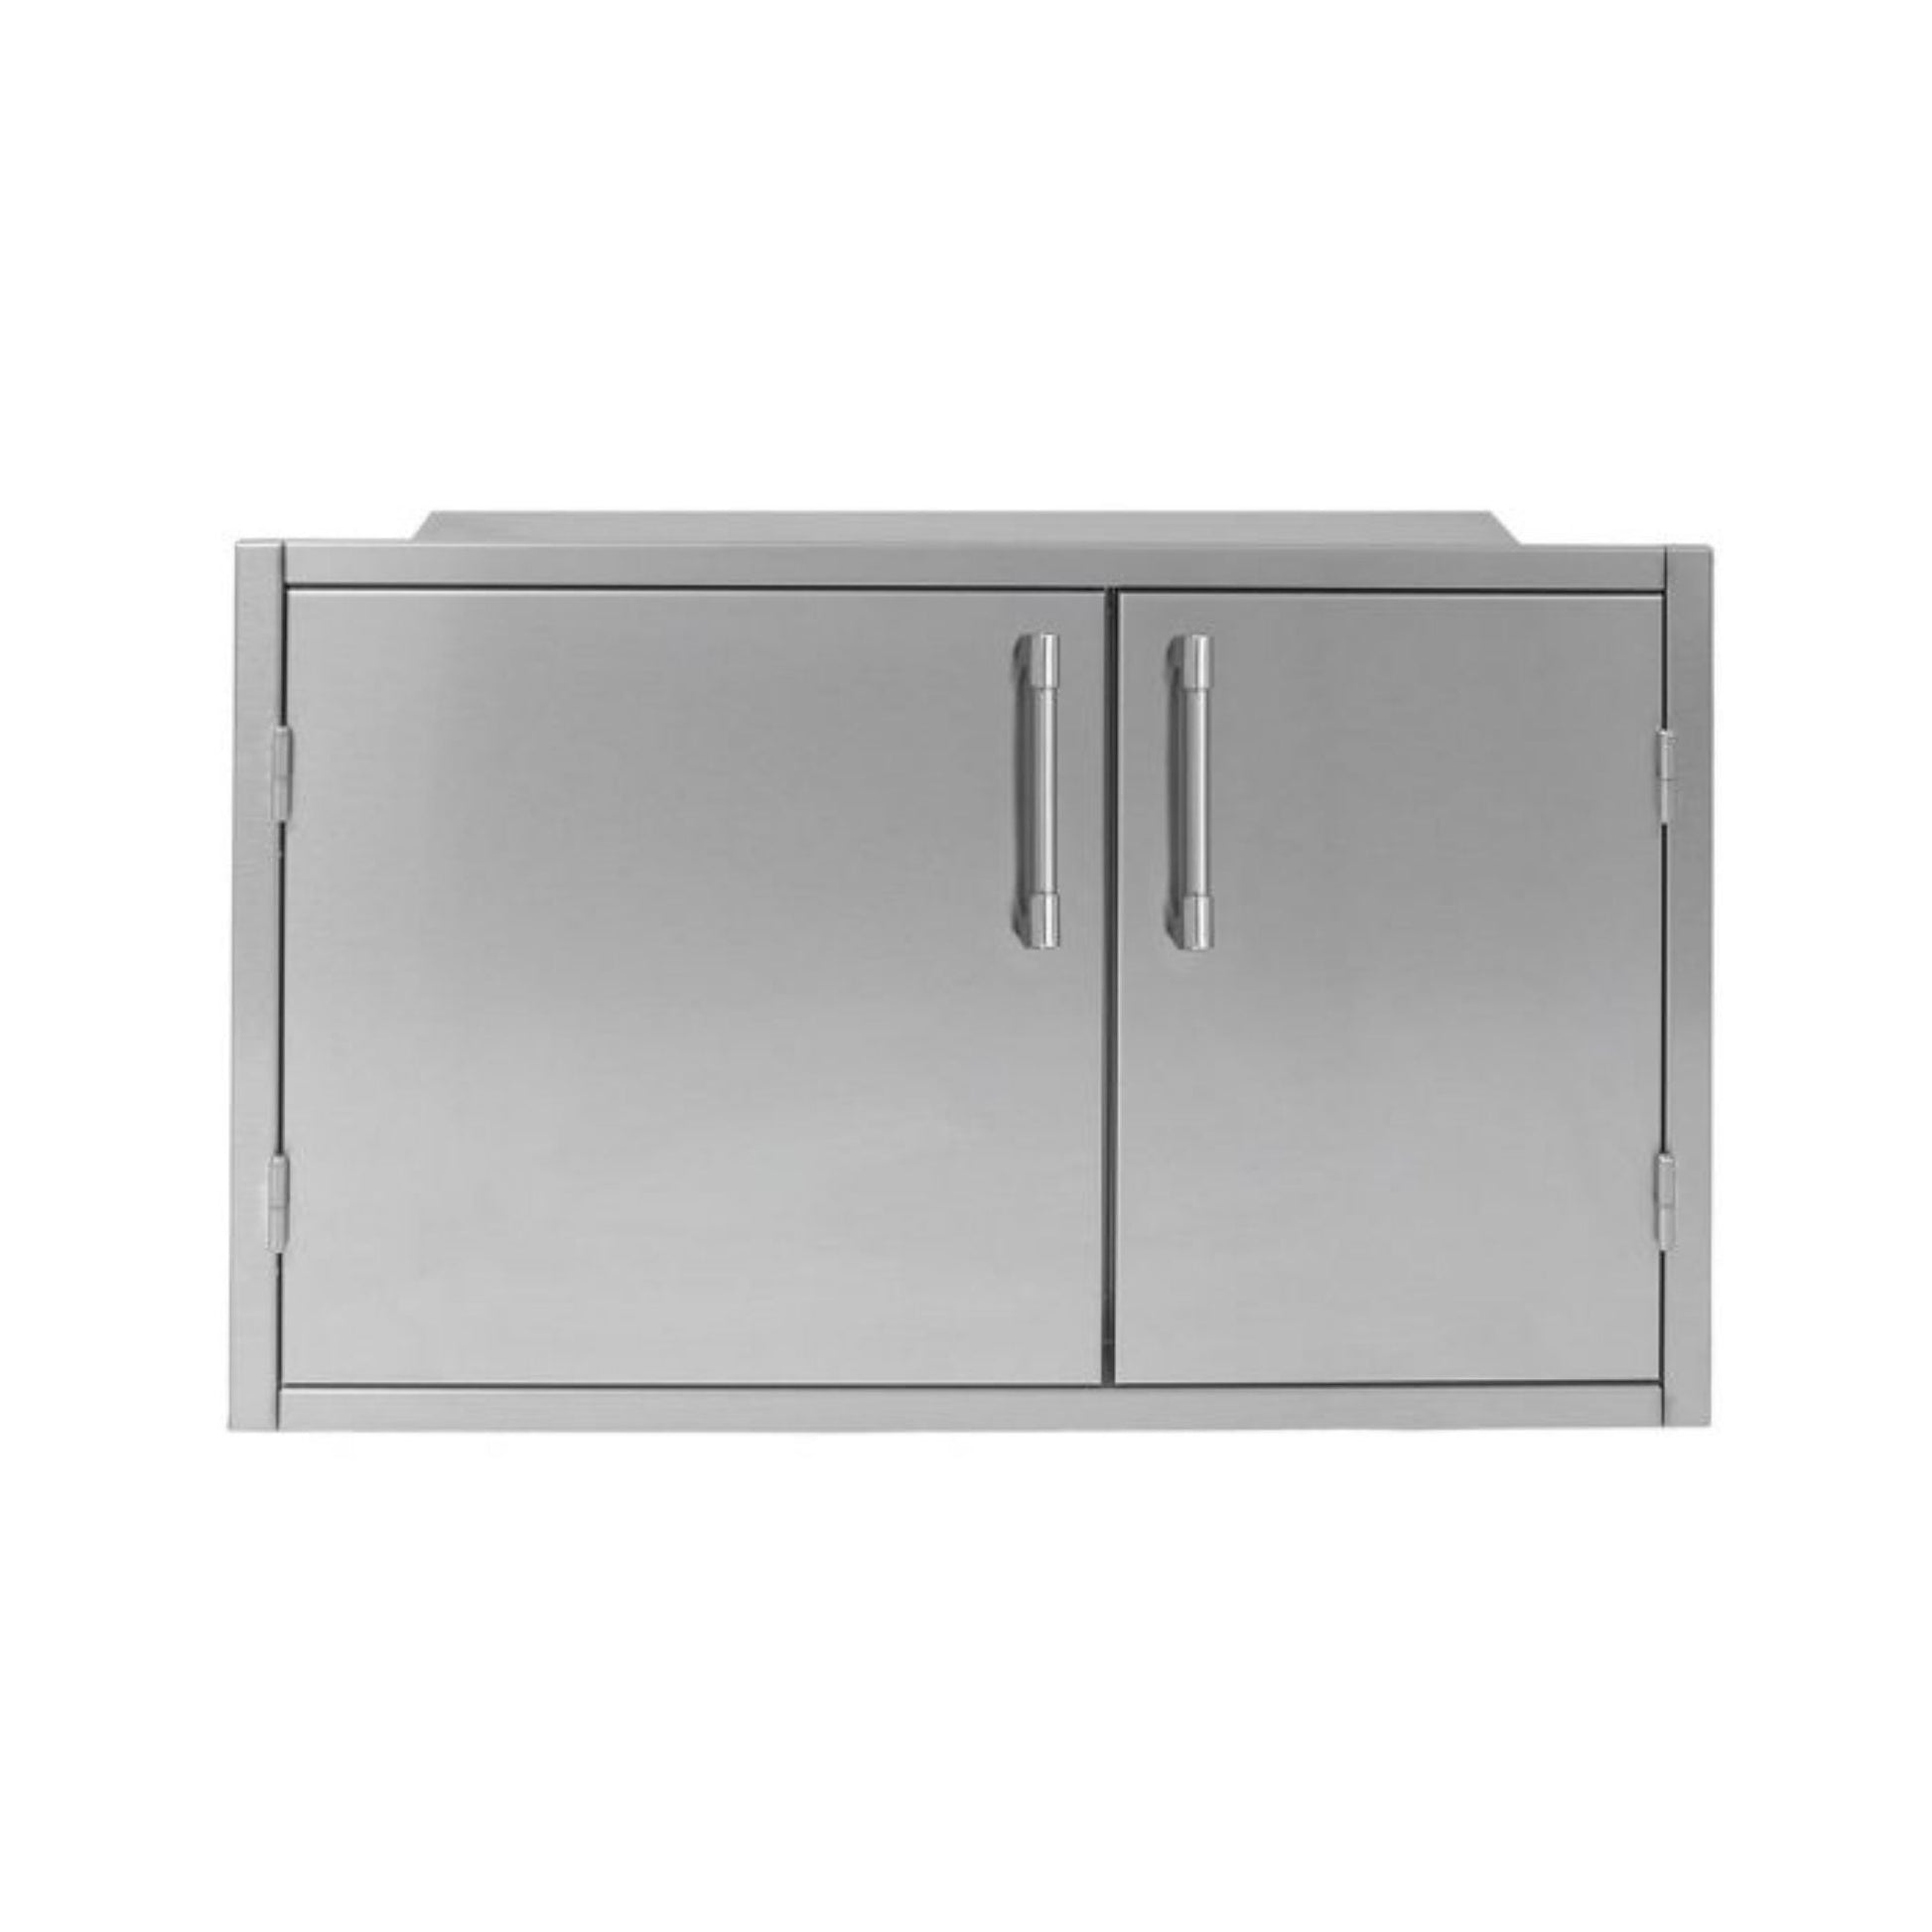 Alfresco 42" Stainless Steel Low Profile Unit (21" high)